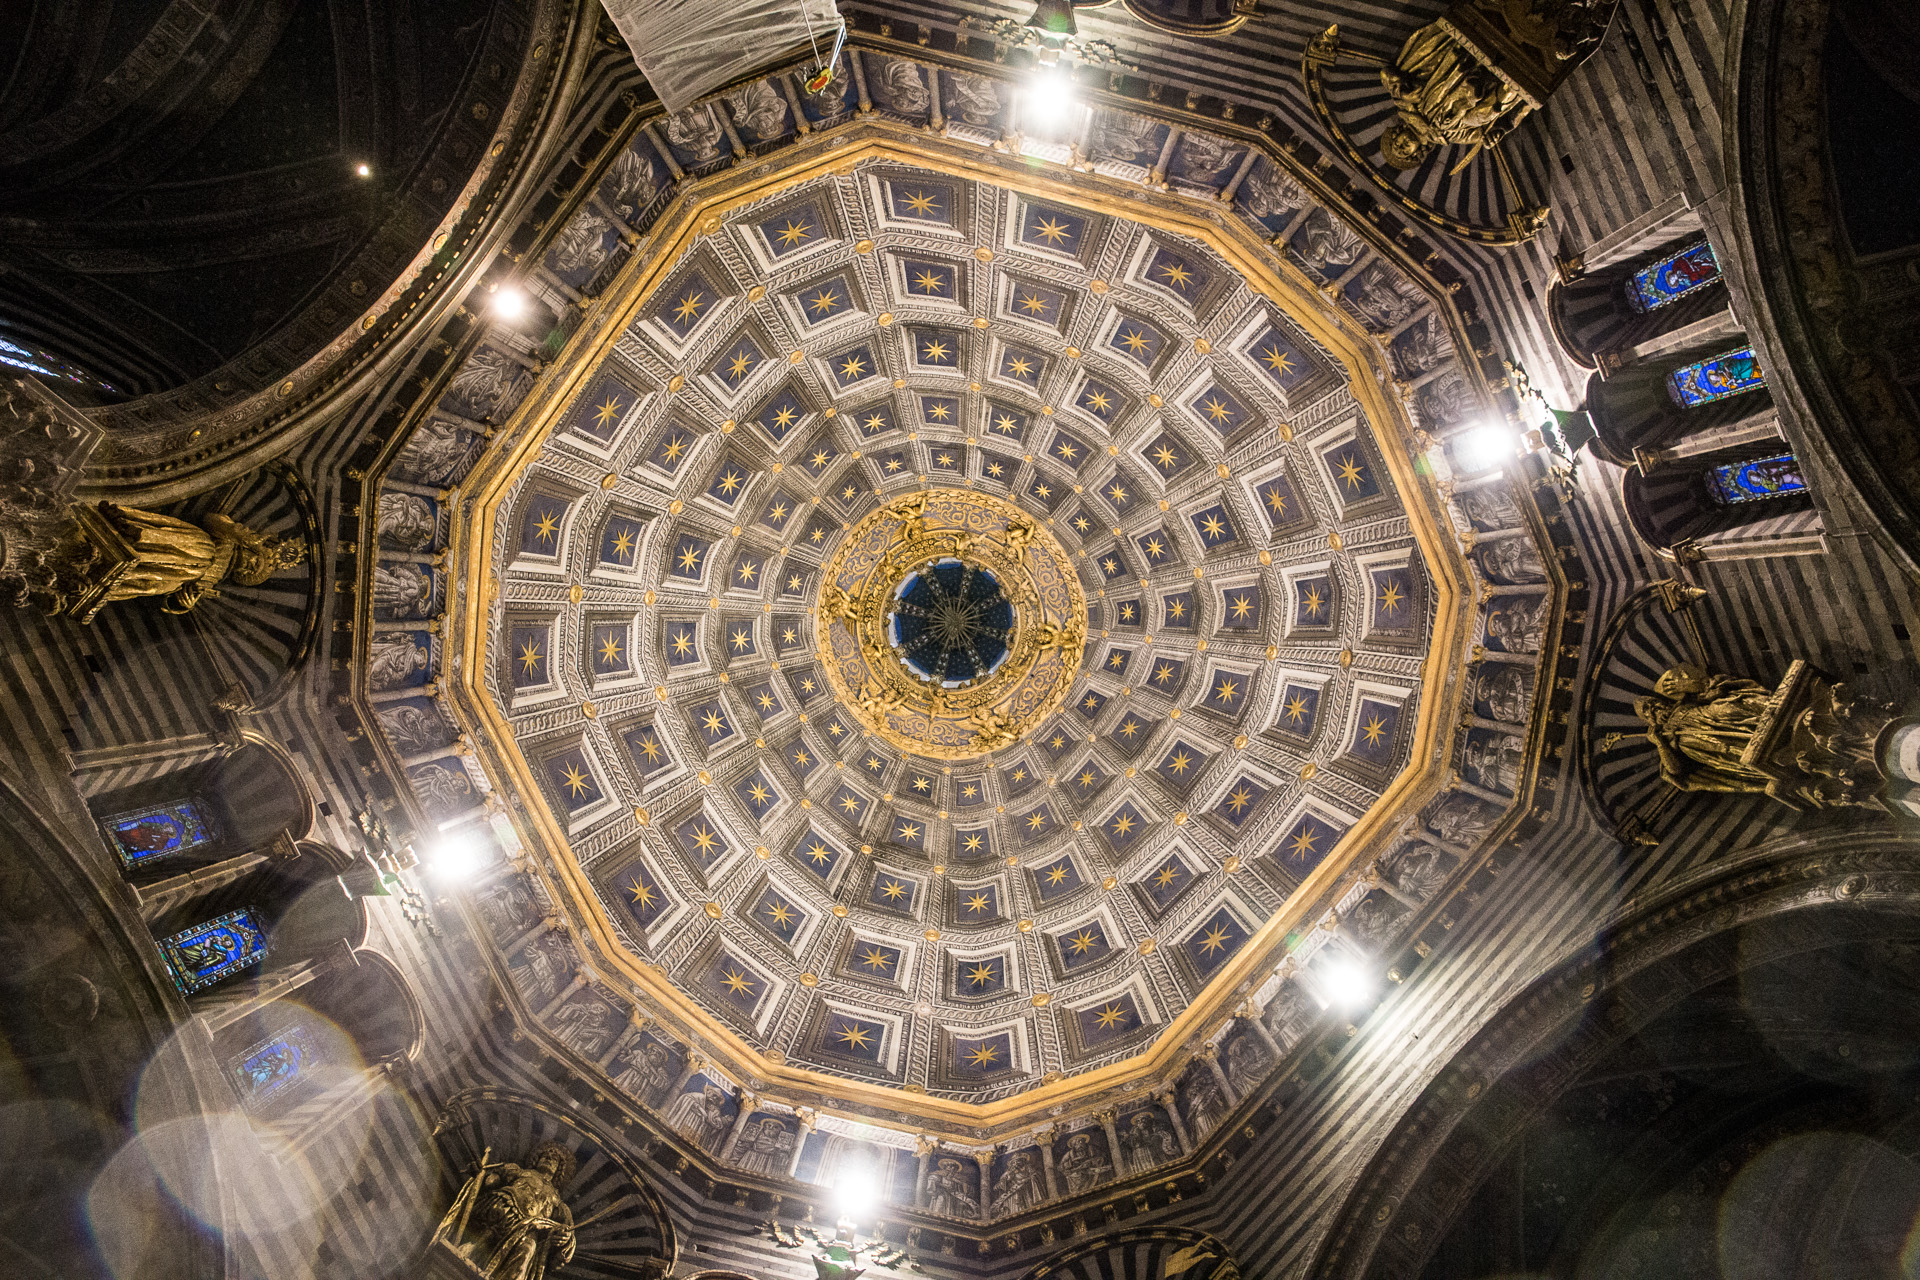 The stars inside the Siena Cathedral